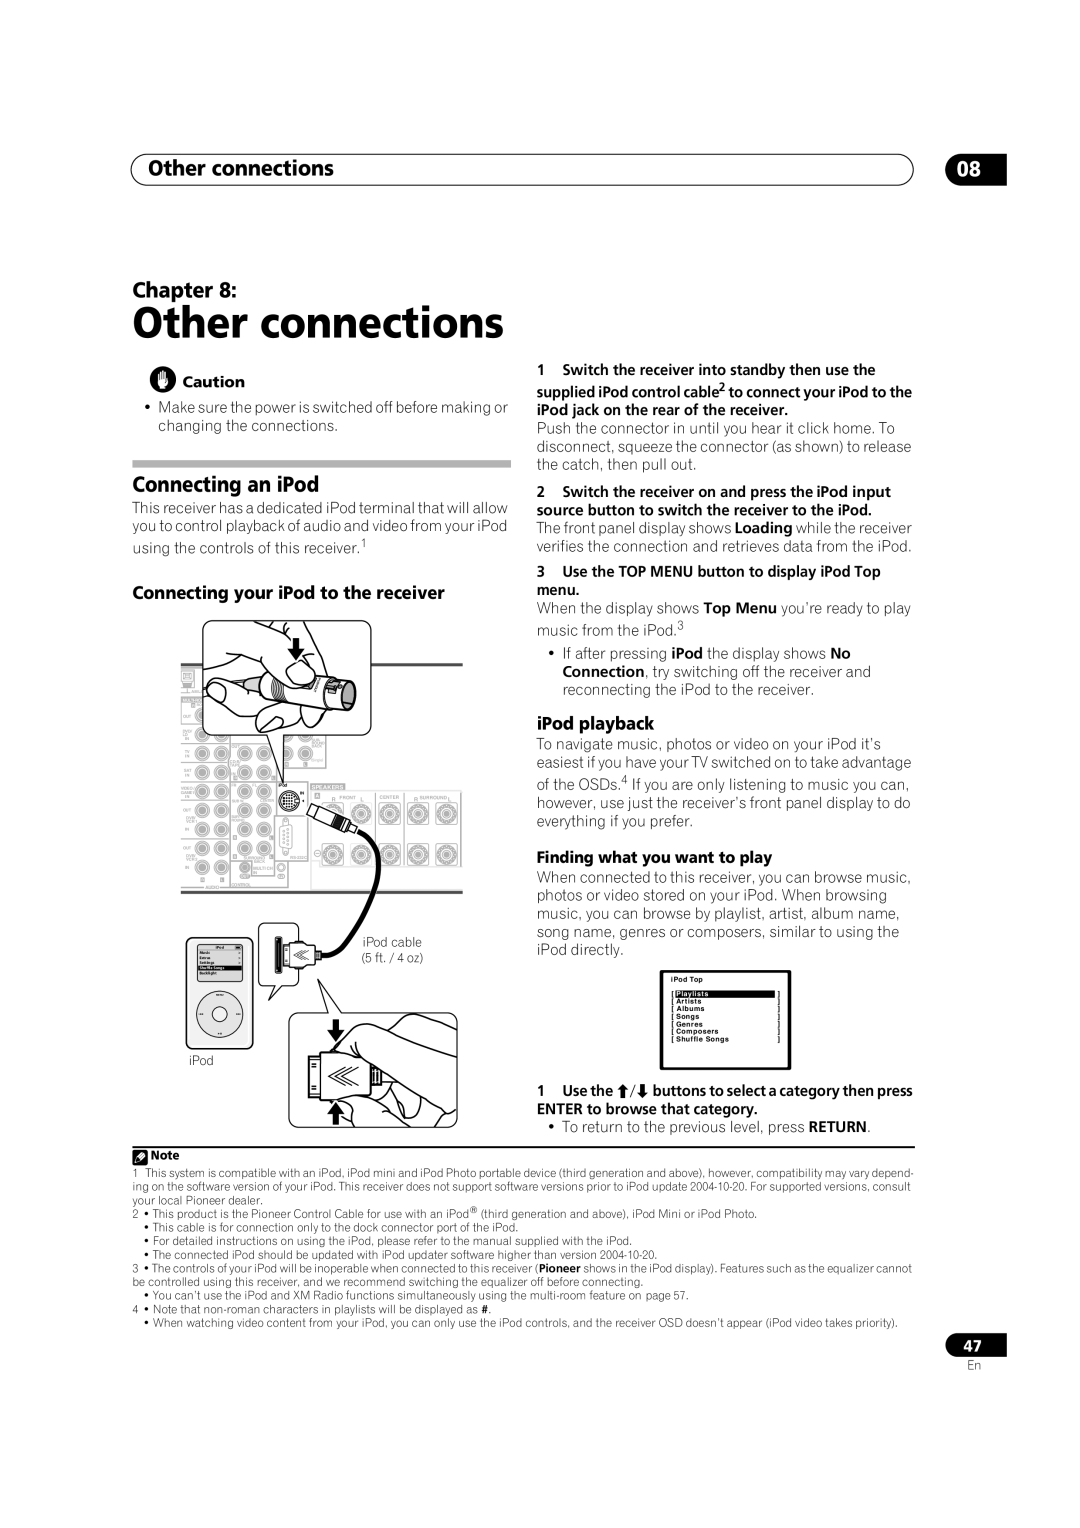 Pioneer VSX-84TXSi-S, VSX-84TXSI Other connections Chapter, Connecting an iPod, Connecting your iPod to the receiver 